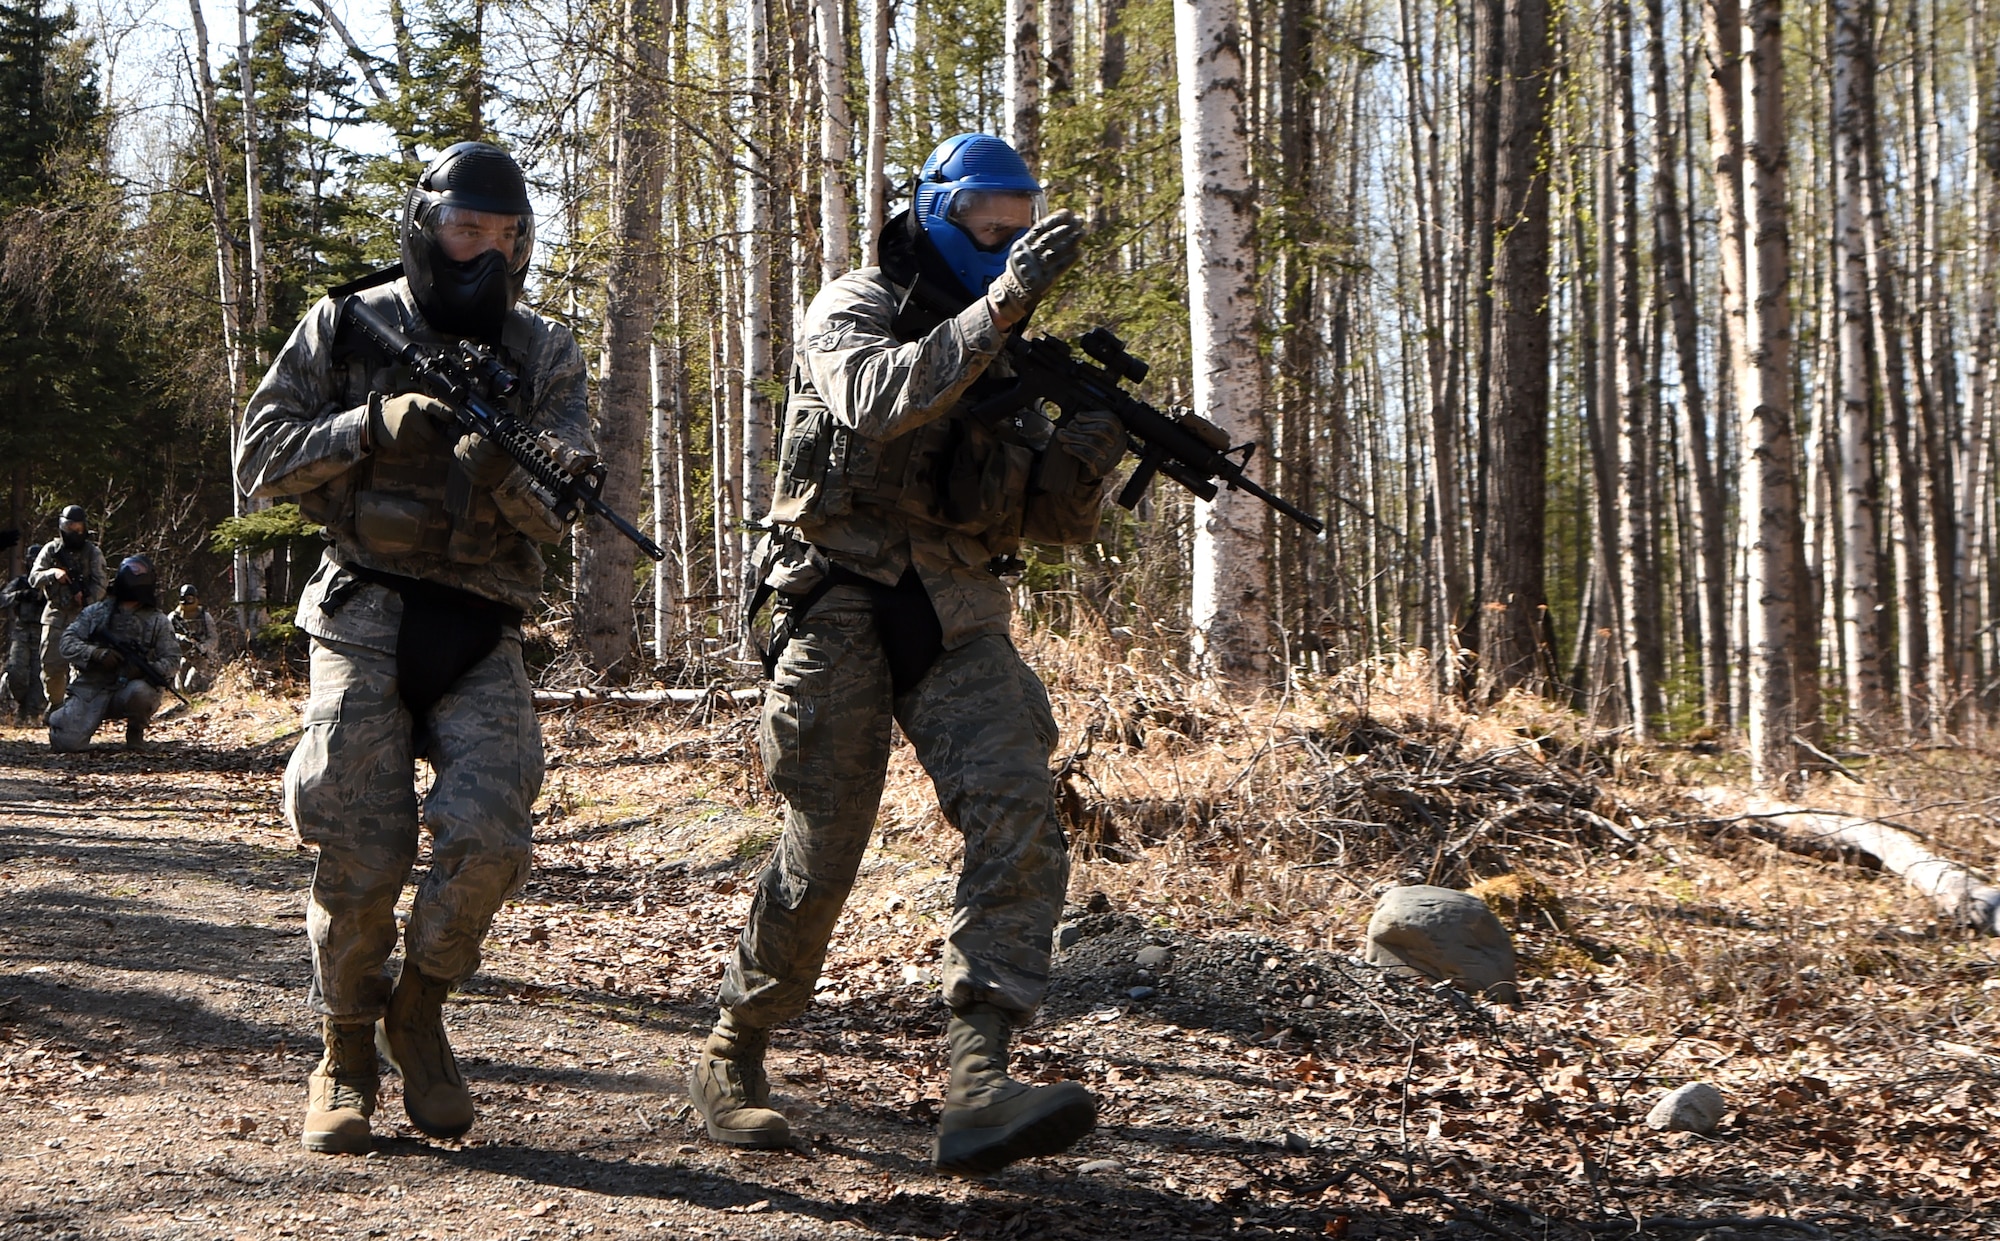 Airmen 1st Class Mathew Rozean (left) and Theodore Dykstra, 673rd Security Forces Squadron, participate in training at Joint Base Elmendorf-Richardson, Alaska, May 4, 2015. A new Air Force medical unit called an Operational Support Team is embedded with the base guard squadron to improve unit health and readiness by studying and addressing issues specific to the squadron. (U.S. Air Force photo by Staff Sgt. Sheila deVera)